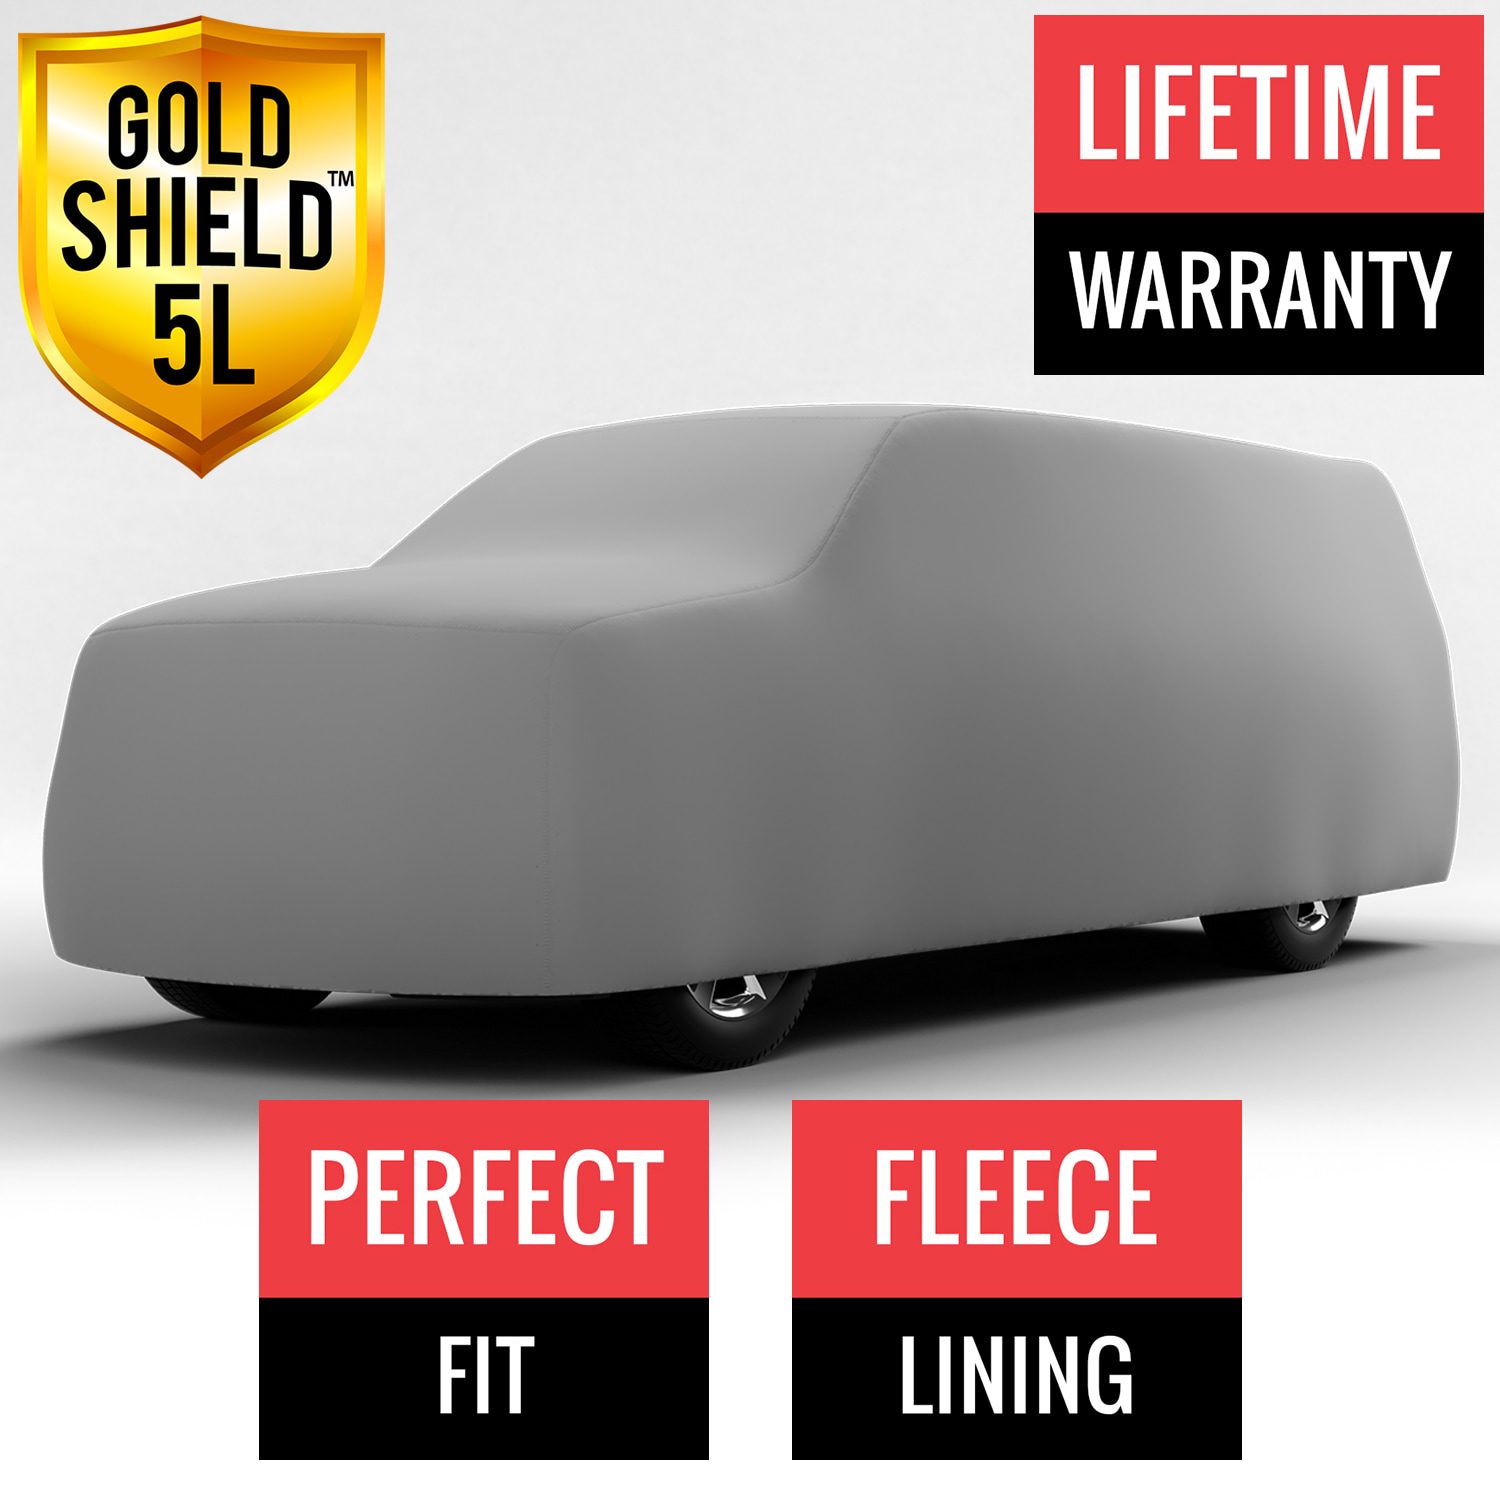 Gold Shield 5L - Car Cover for GMC C1500 1998 Regular Cab Pickup 6.5 Feet Bed with Camper Shell